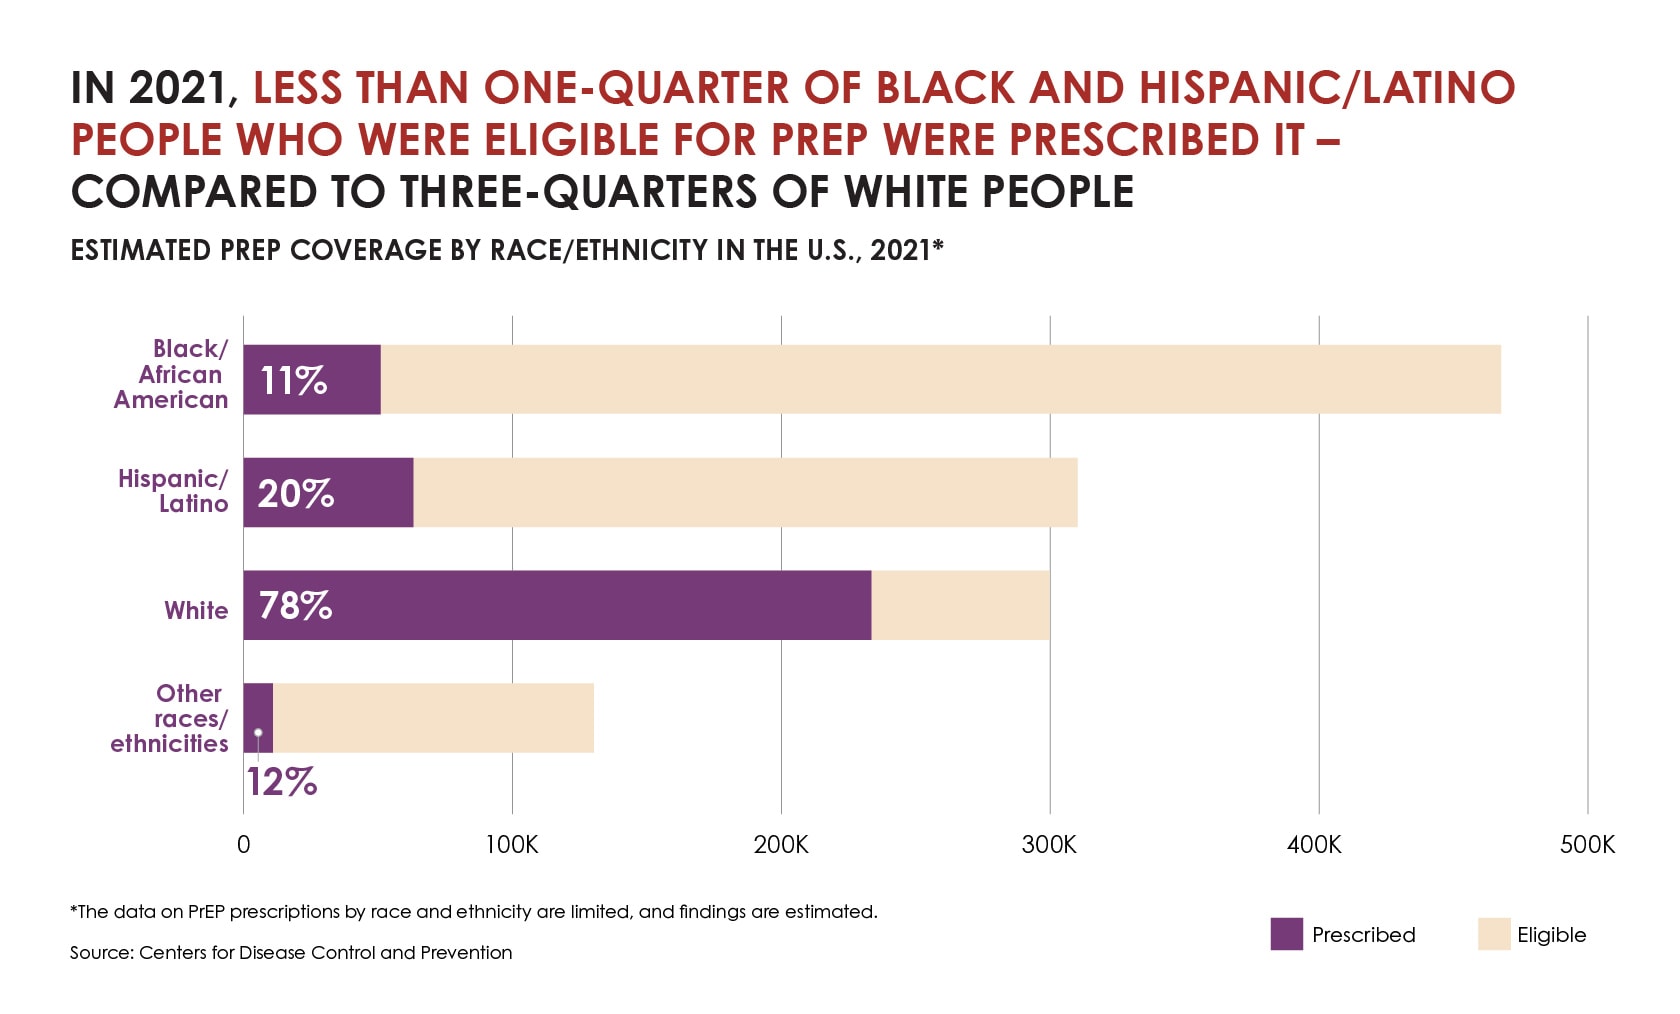 Graphic chart showing the estimated PrEP coverage by race/ethnicity in the U.S., 2021*